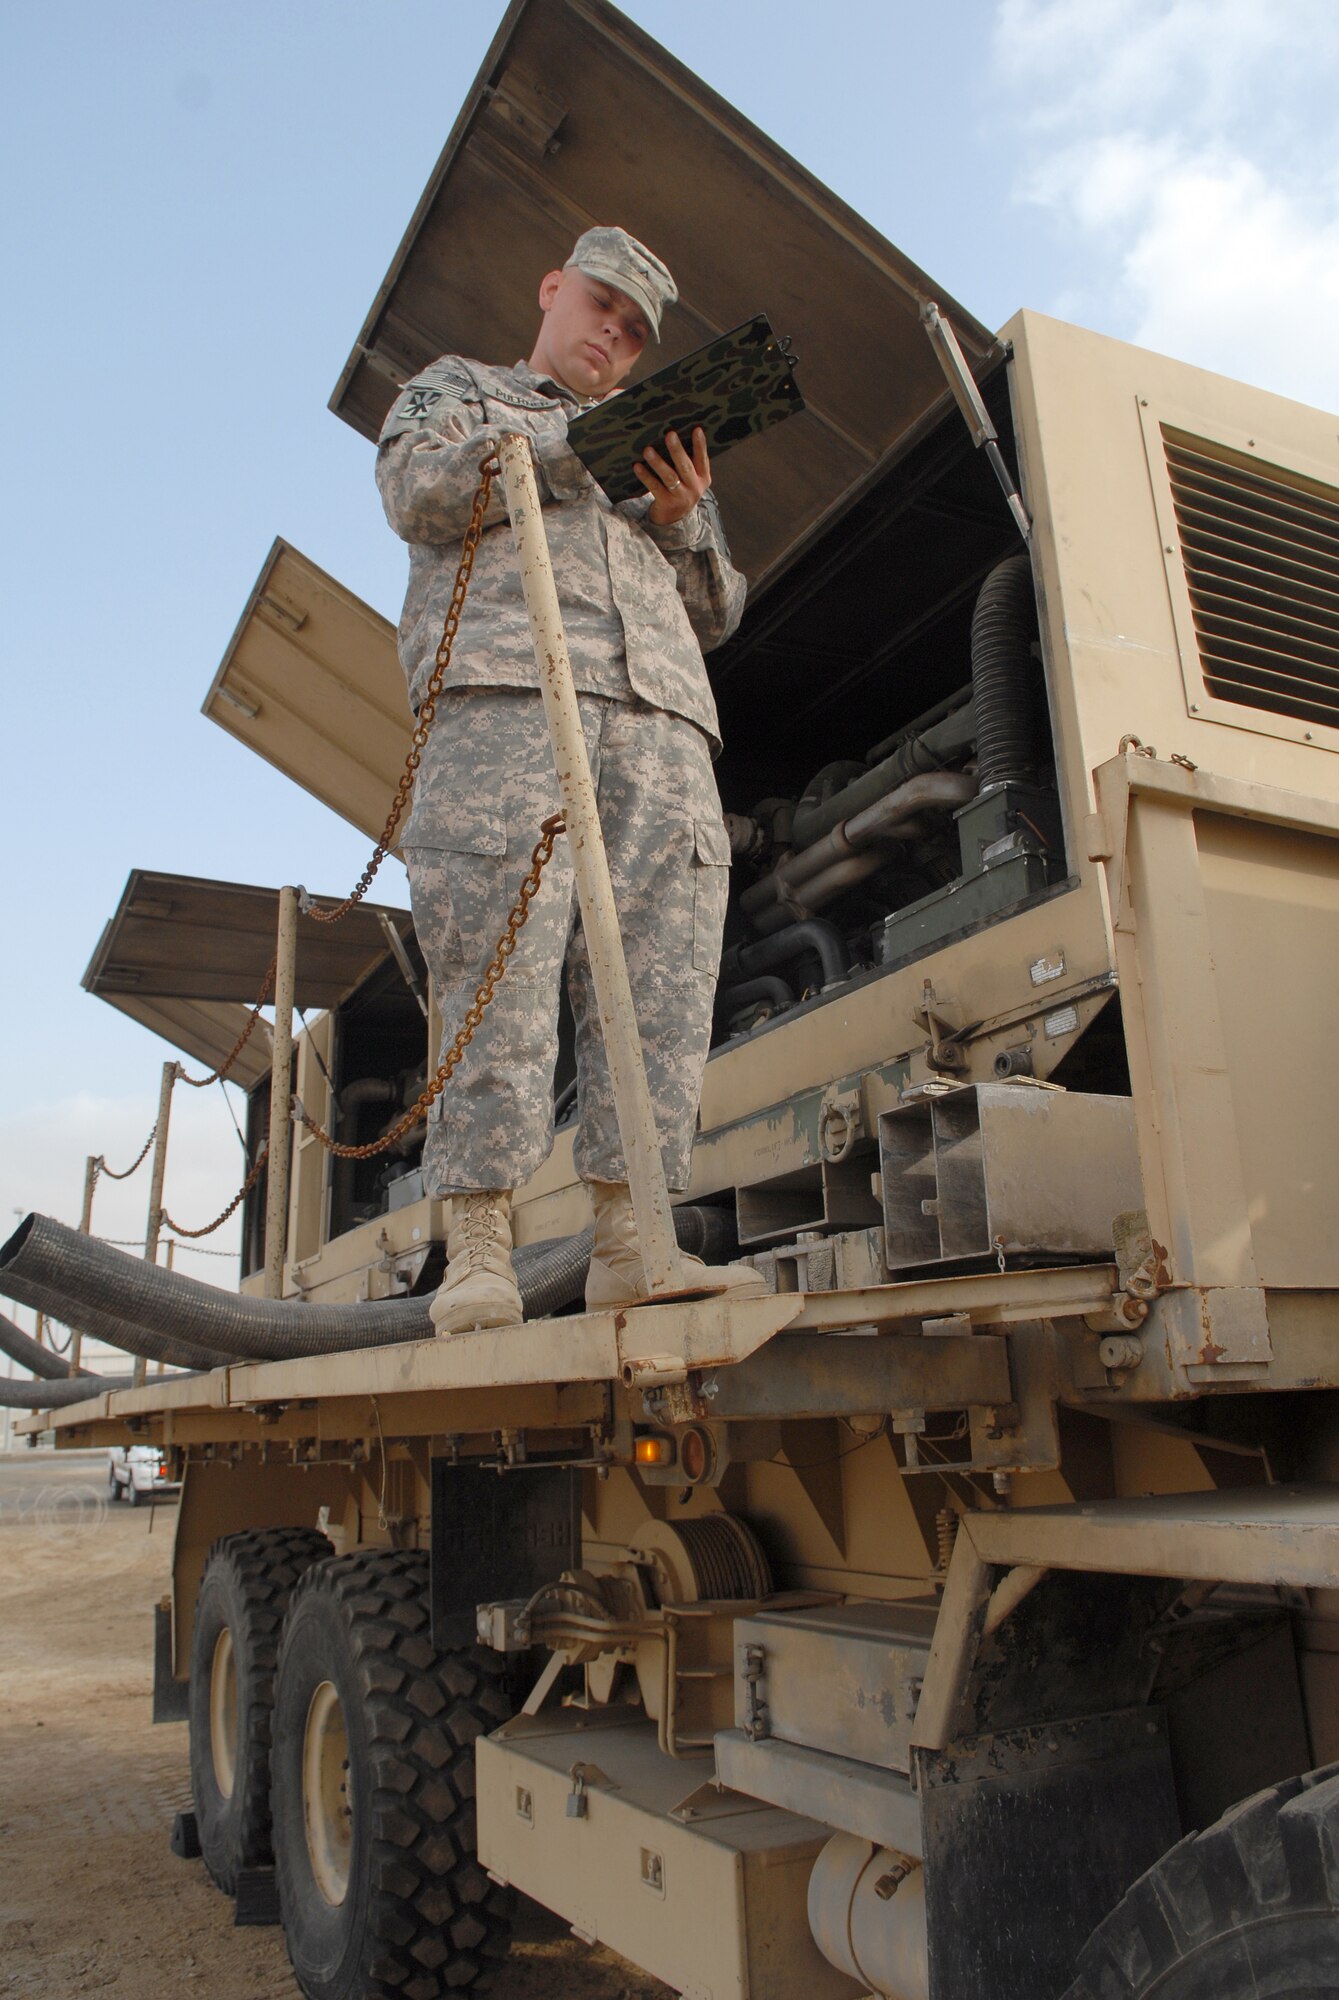 SOUTHWEST ASIA - U.S. Army Private Justin Puerner, generator mechanic,
conducts preventive maintenance checks and services on an electrical power
plant vehicle. Private Puerner is deployed to the Air Force's 380th
Air Expeditionary Wing from 5-52 Air Defense Artillery Battalion, Fort
Bliss, Texas. The vehicles support the first Army Patriot mission to be
incorporated into the 380th Air Expeditionary Wing's mission in support of
Operations Iraqi and Enduring Freedom and Joint Task Force Horn of Africa.
Private Puerner is from Green Bay, Wis. (U.S. Air Force photo by Tech.
Sgt. Denise Johnson) (released)